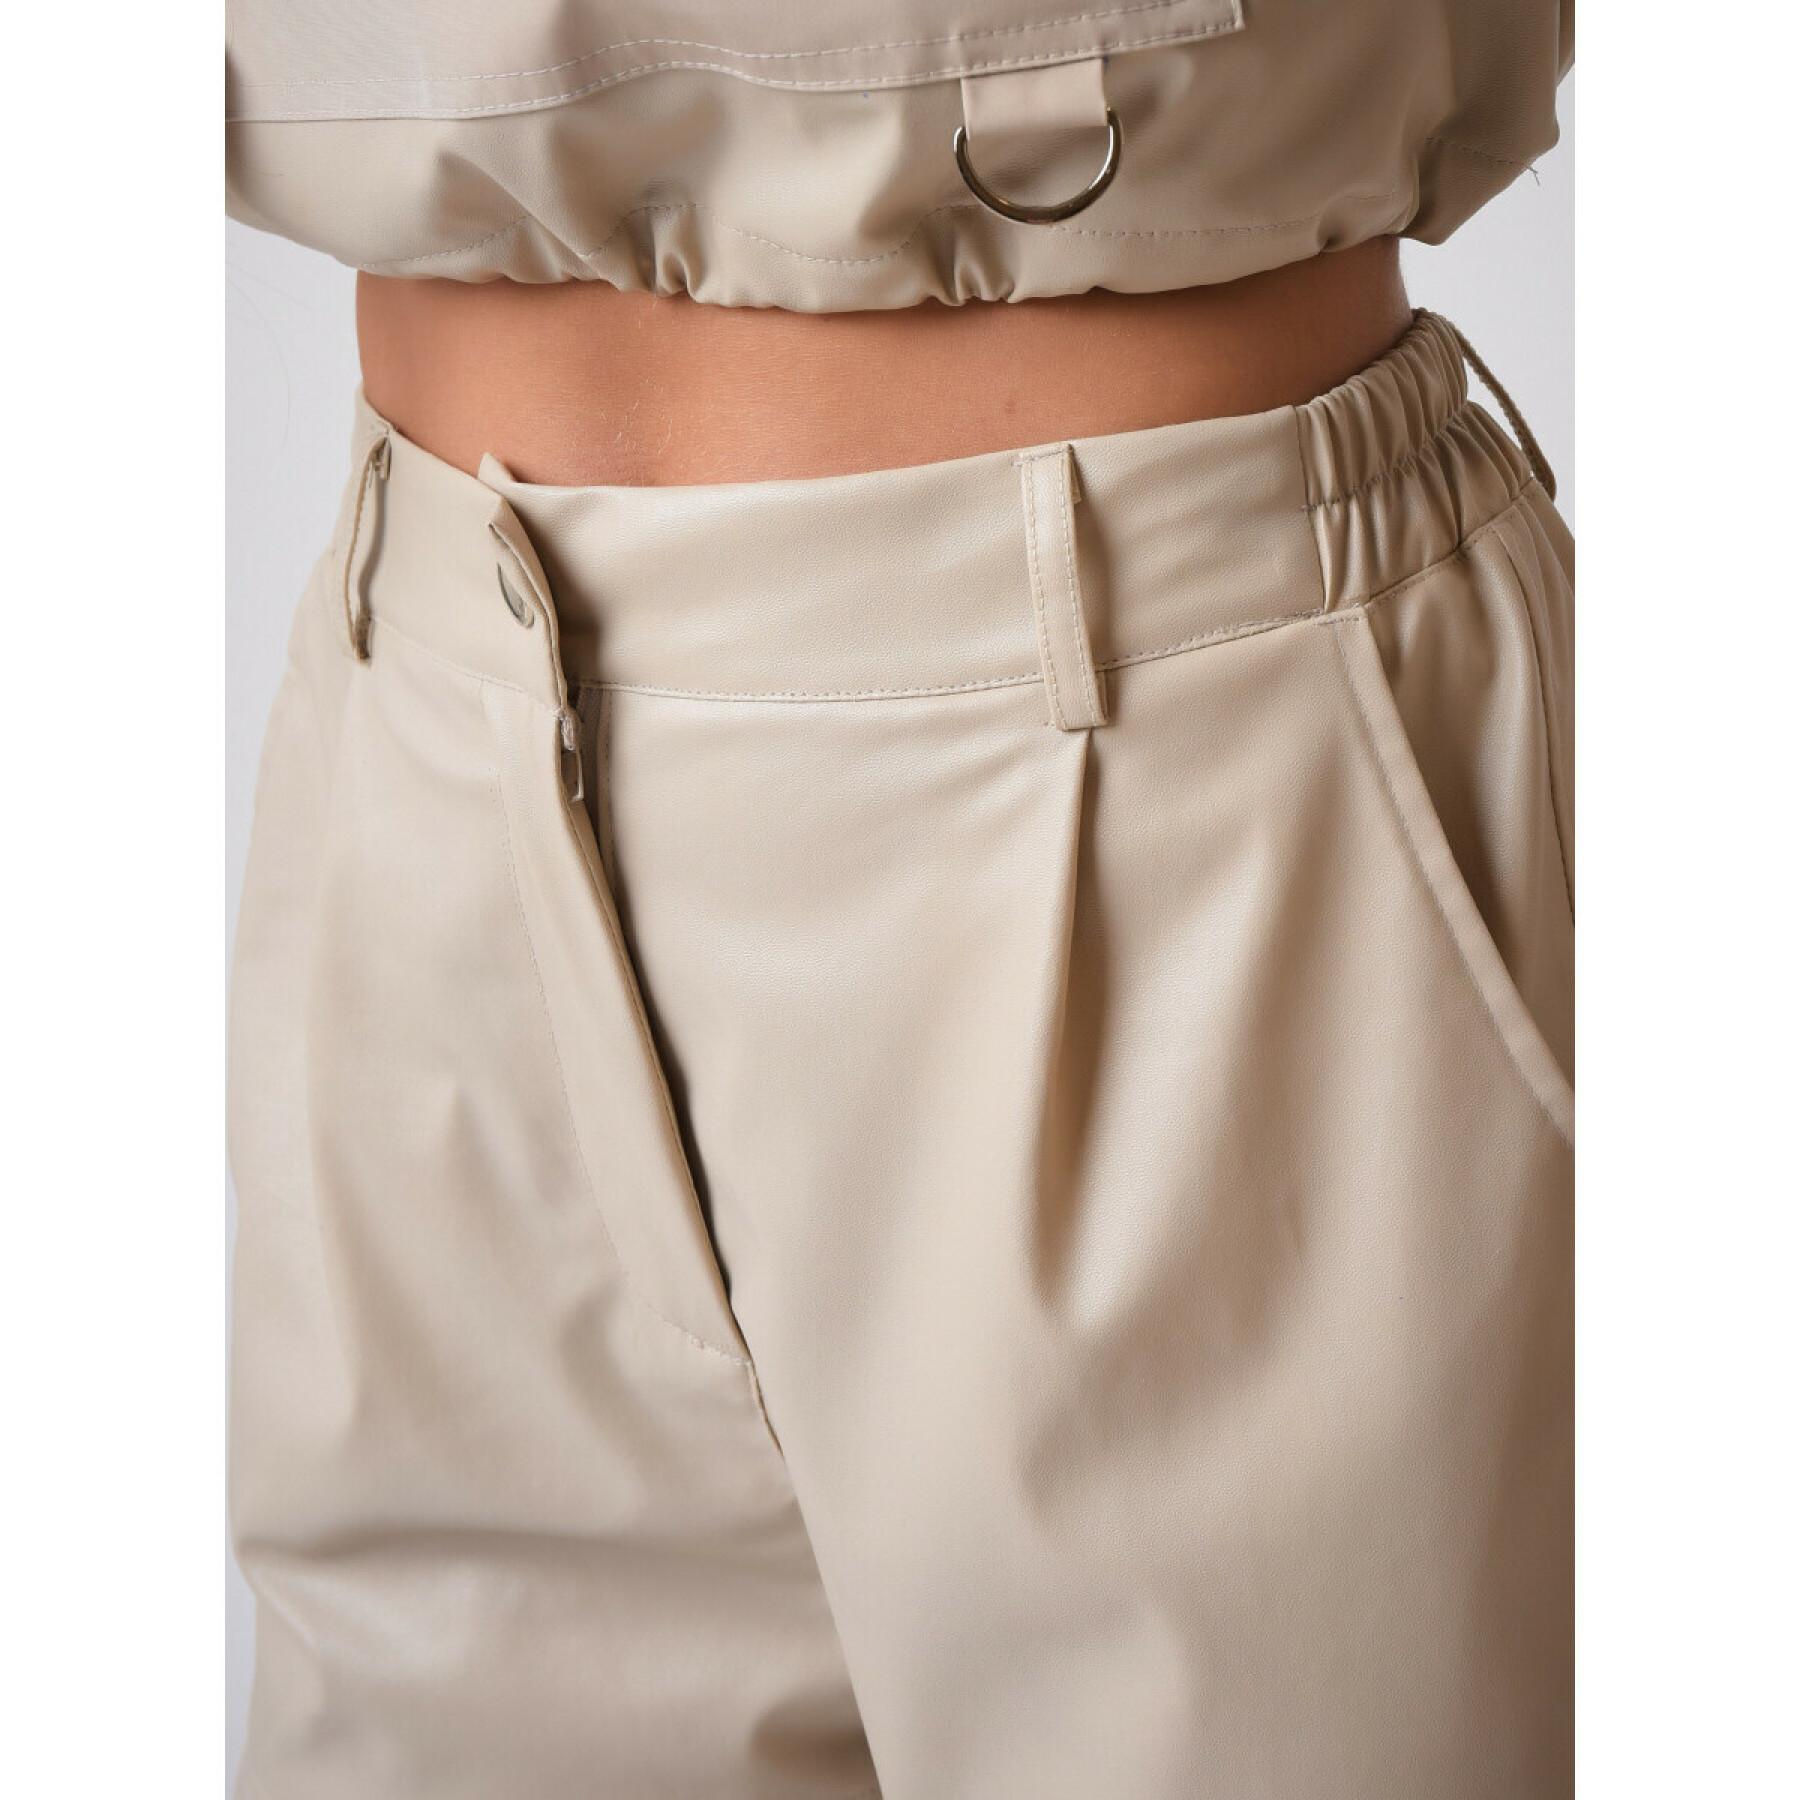 Women's imitation leather square padded trousers Project X Paris